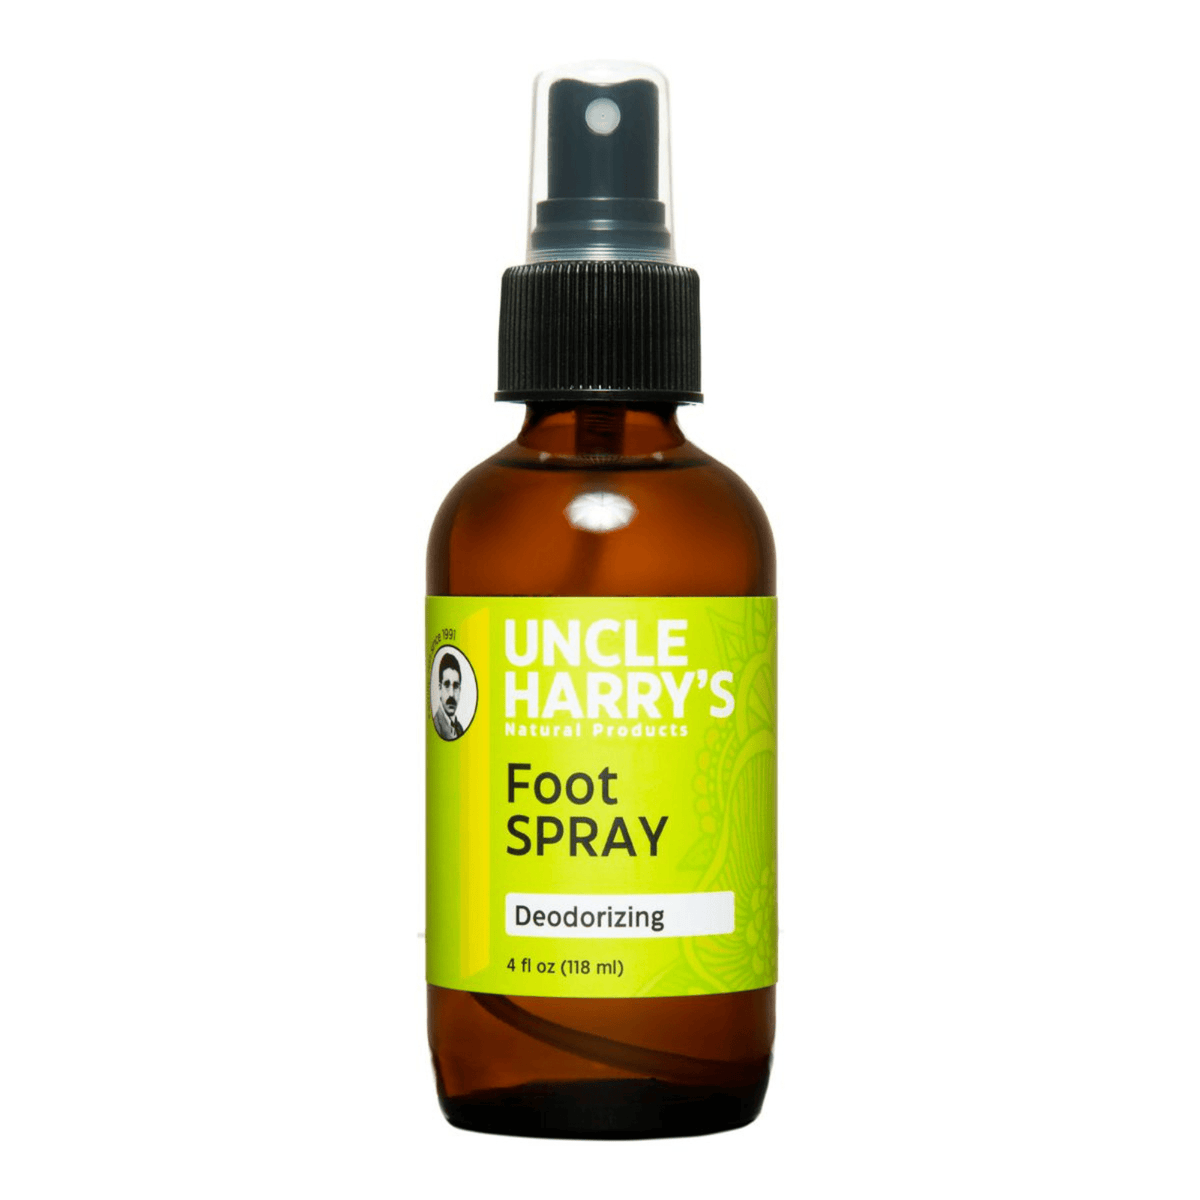 Primary Image of Foot Spray